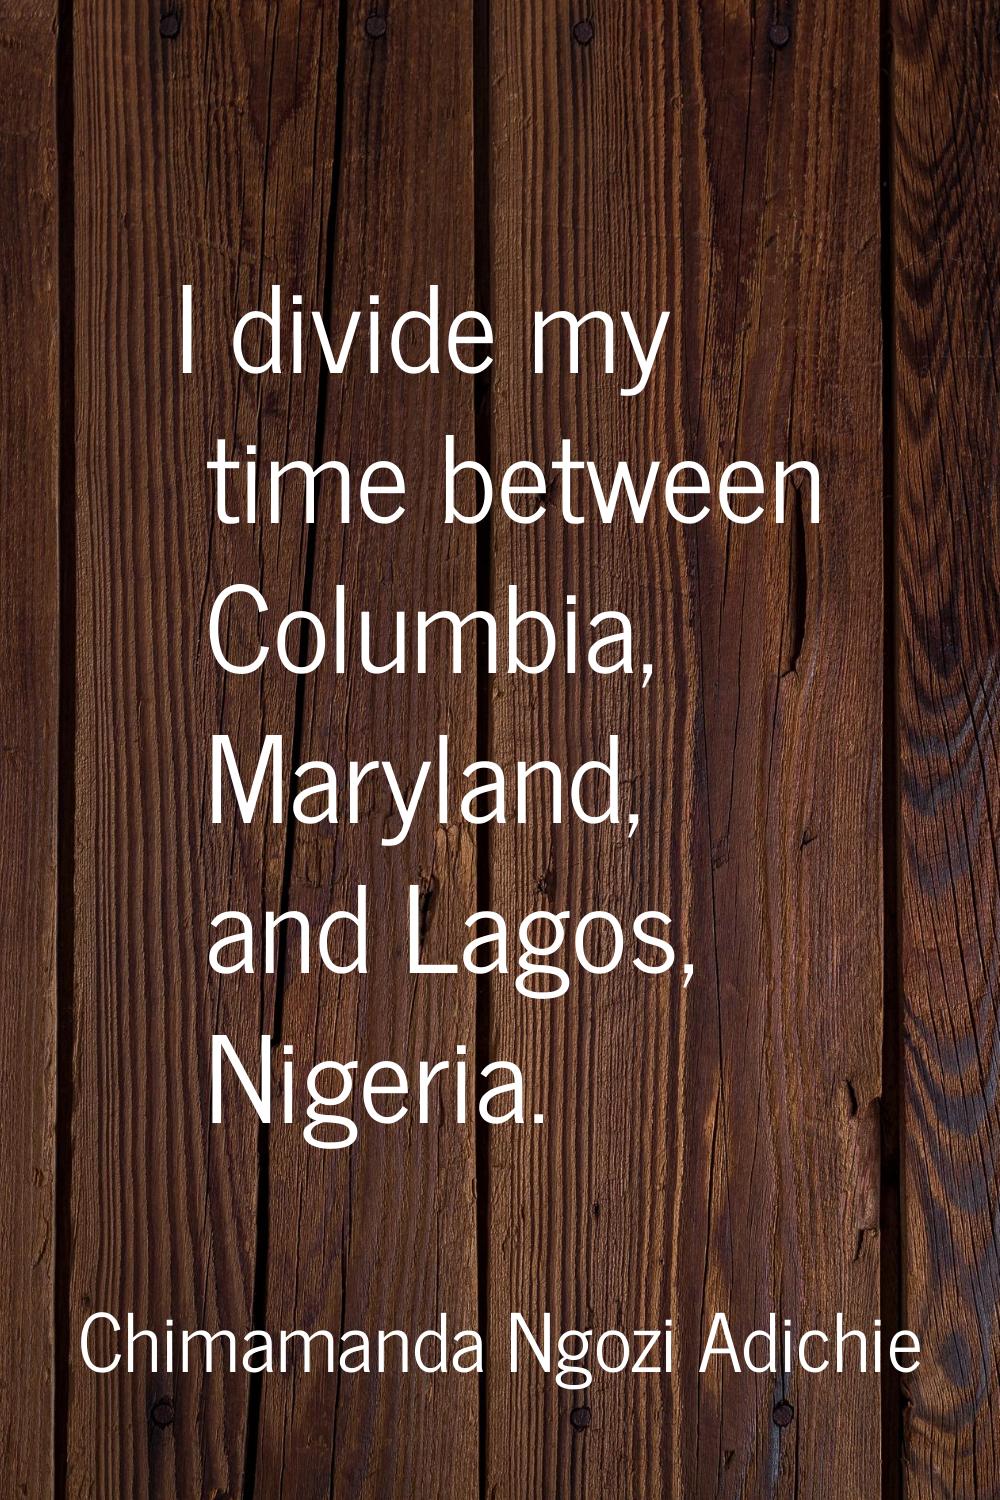 I divide my time between Columbia, Maryland, and Lagos, Nigeria.